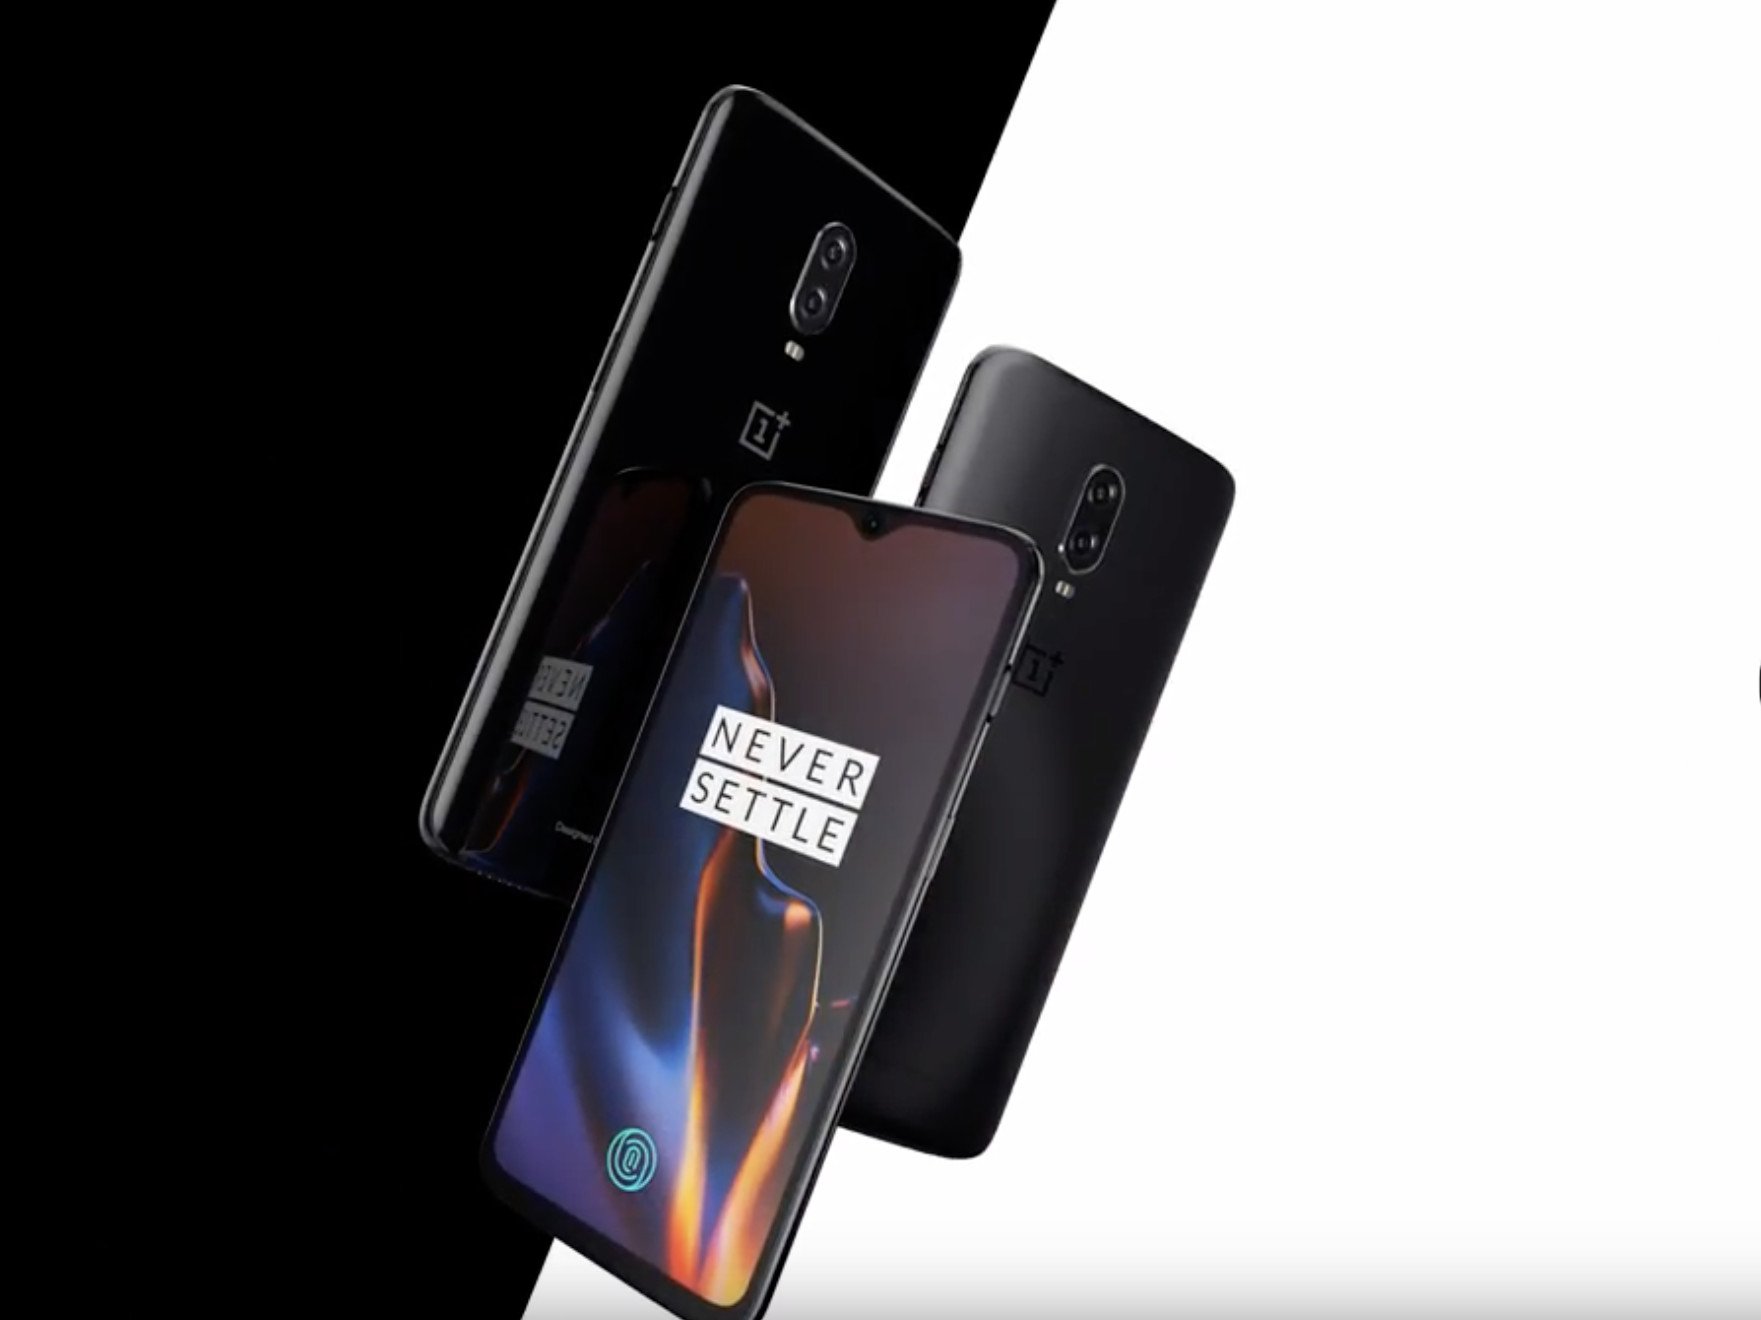 oneplus 6t promo front and back